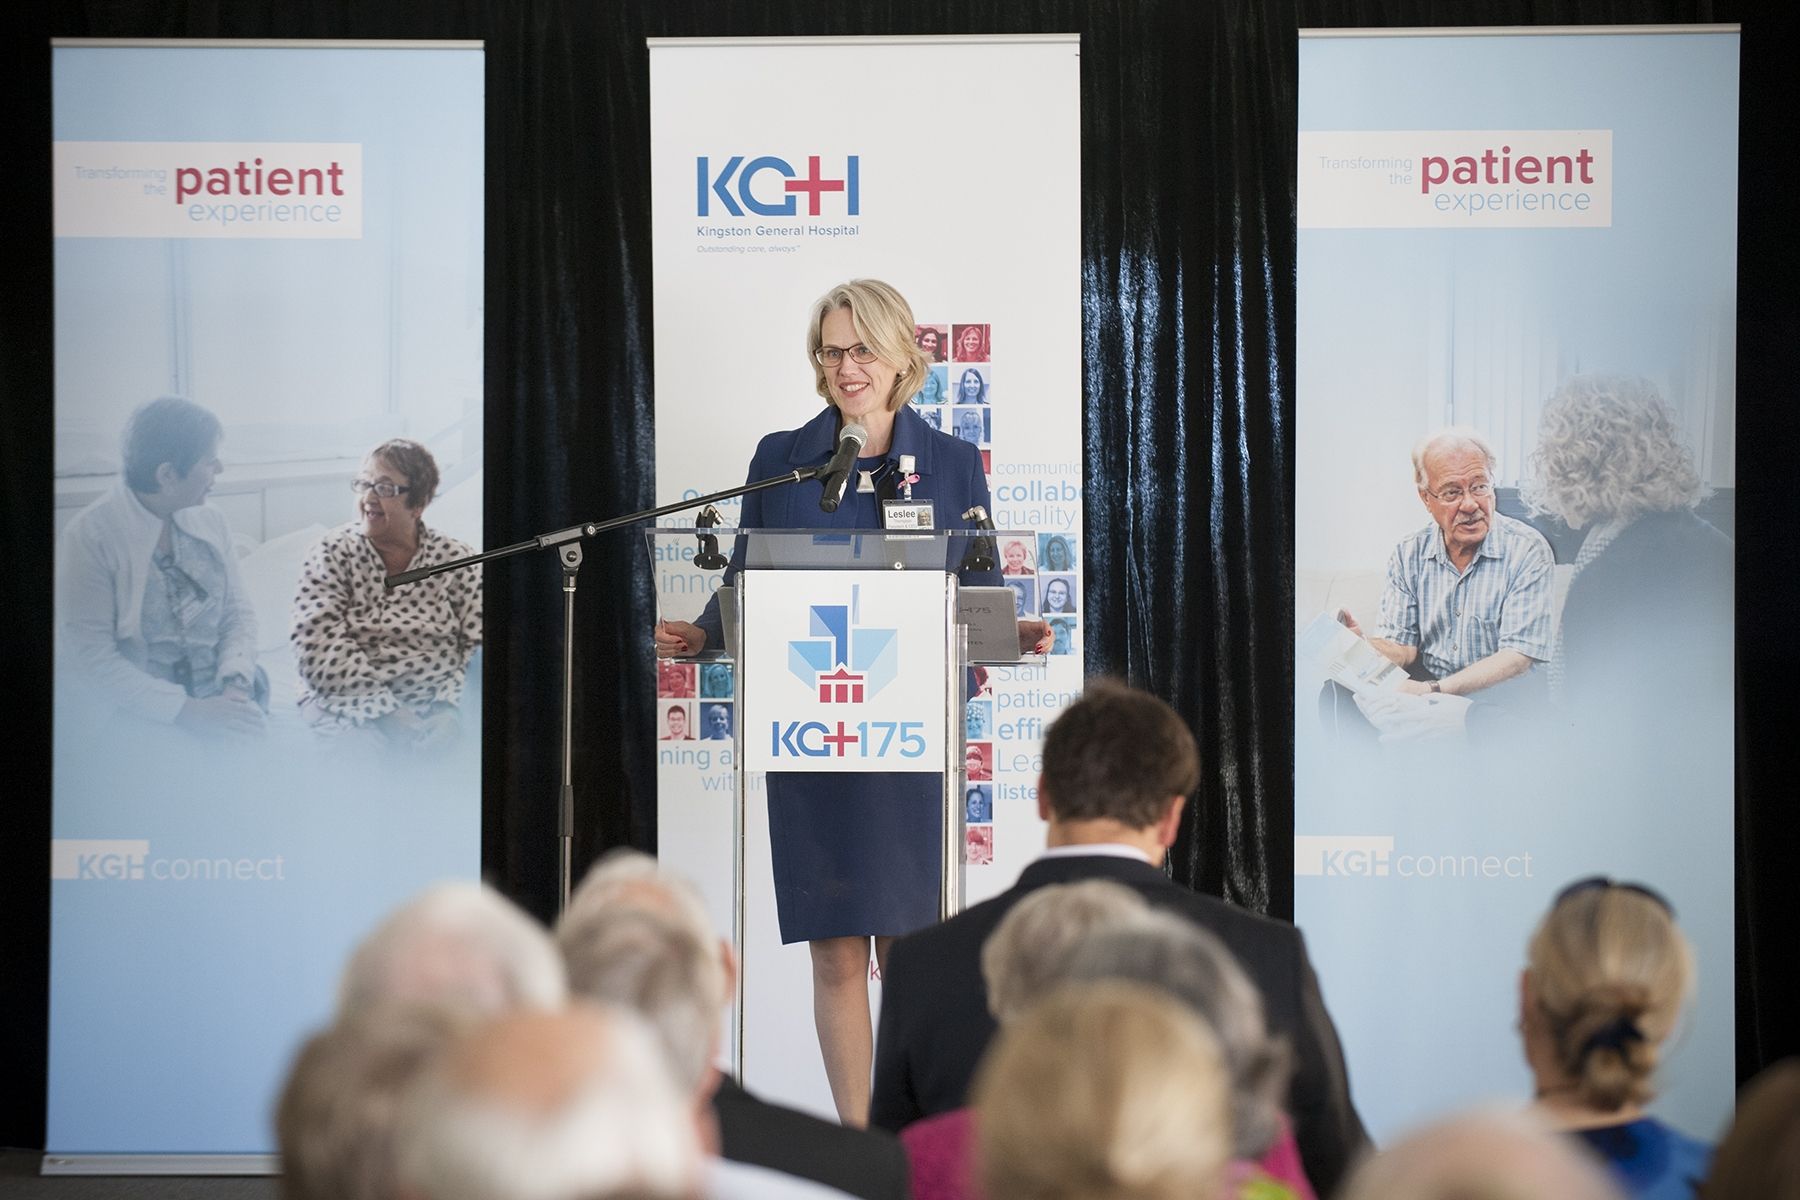 KGH President and CEO Leslee Thompson makes a few comments and thanked the event sponsors, Lovell Drugs, Honeywell and KCCU for their support.